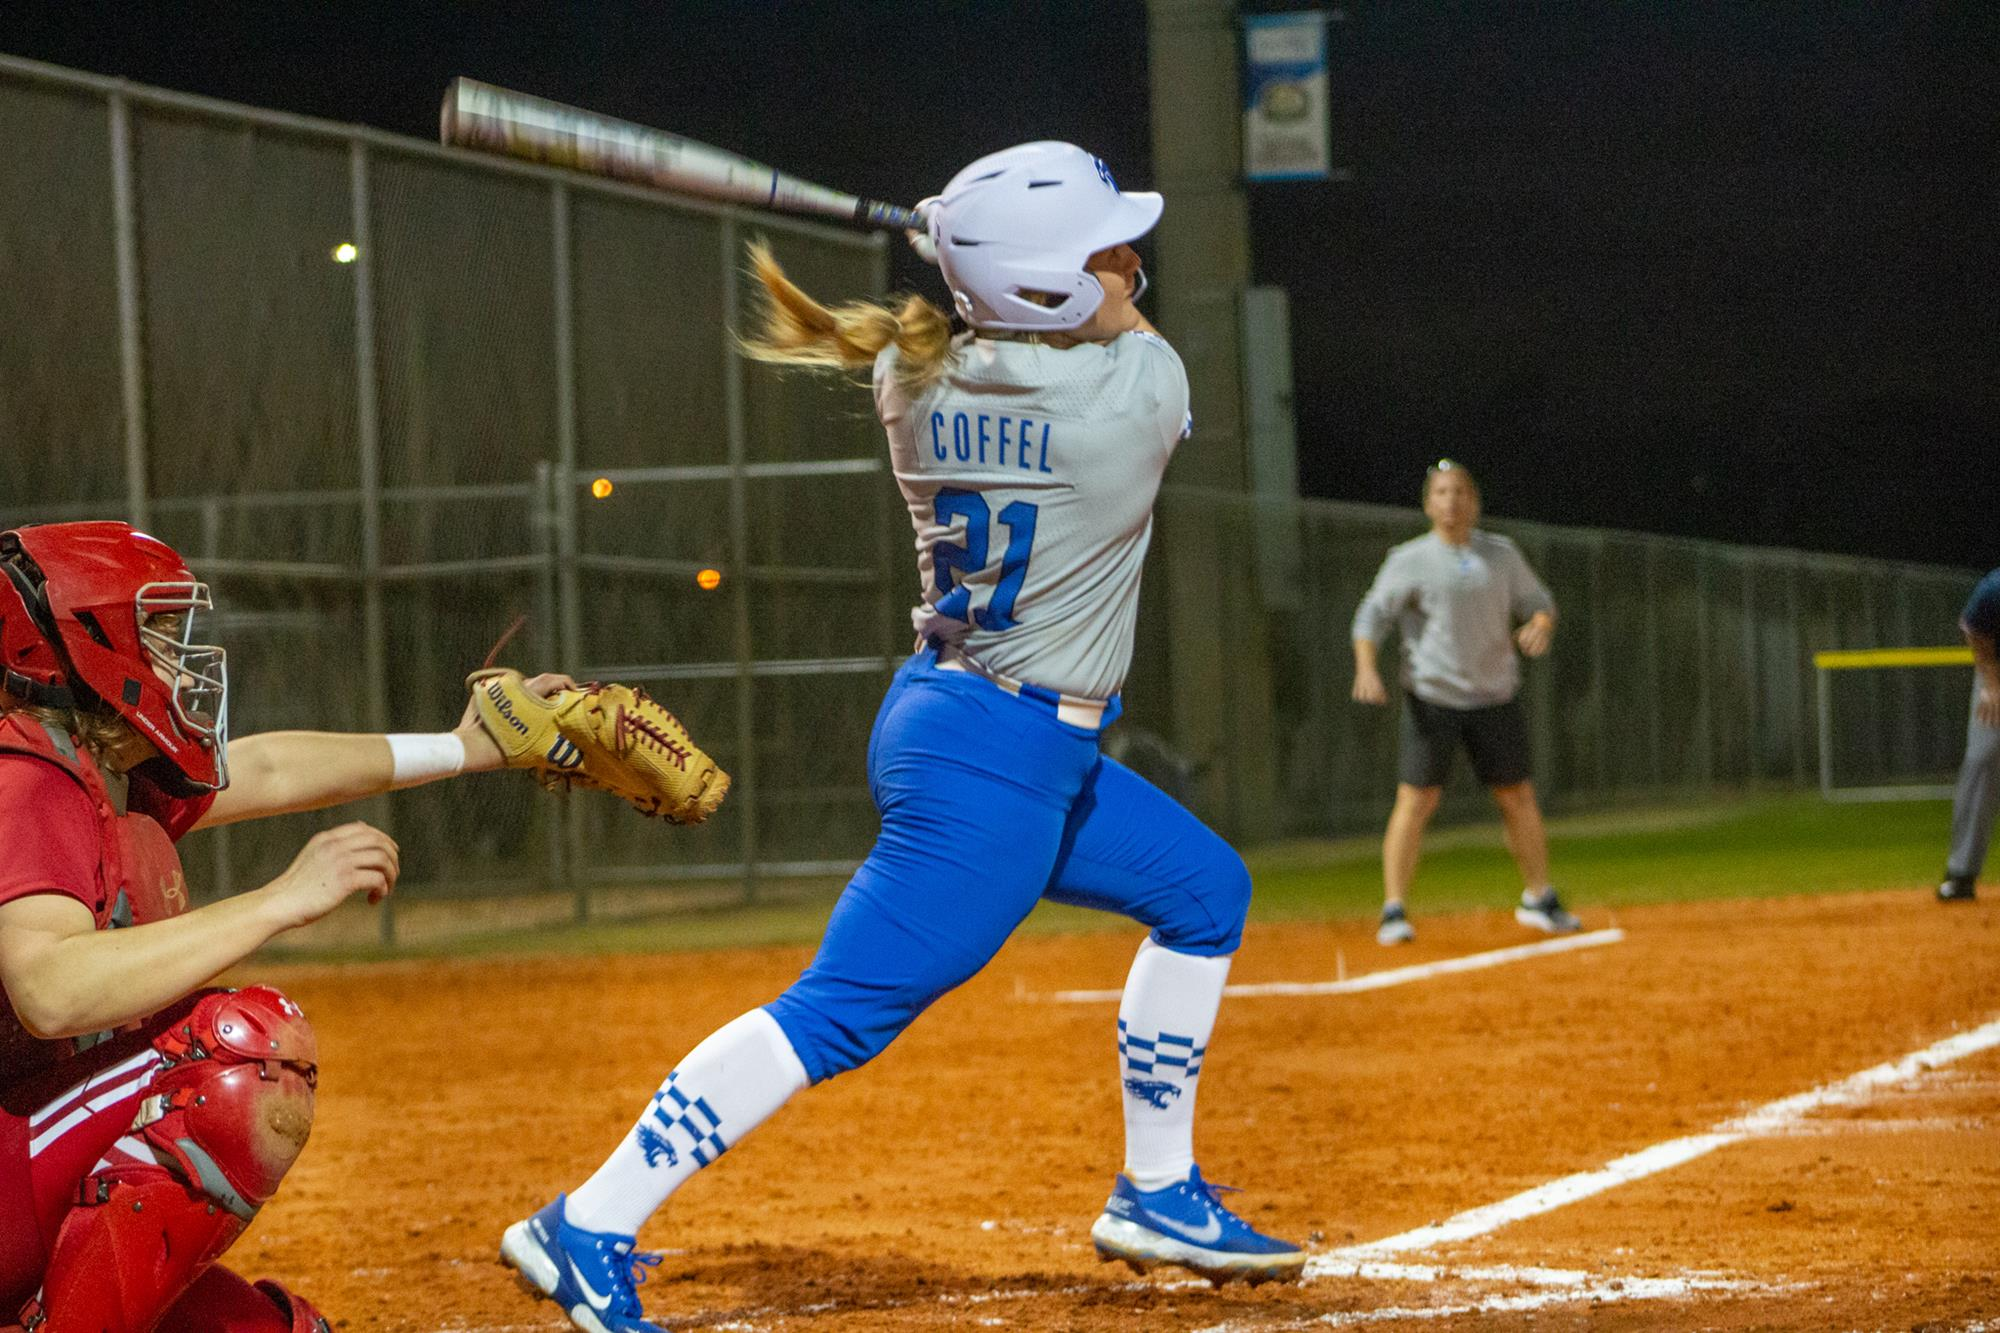 Coffel’s Timely Blast, Schoonover’s Complete Game Gives UK Sweep